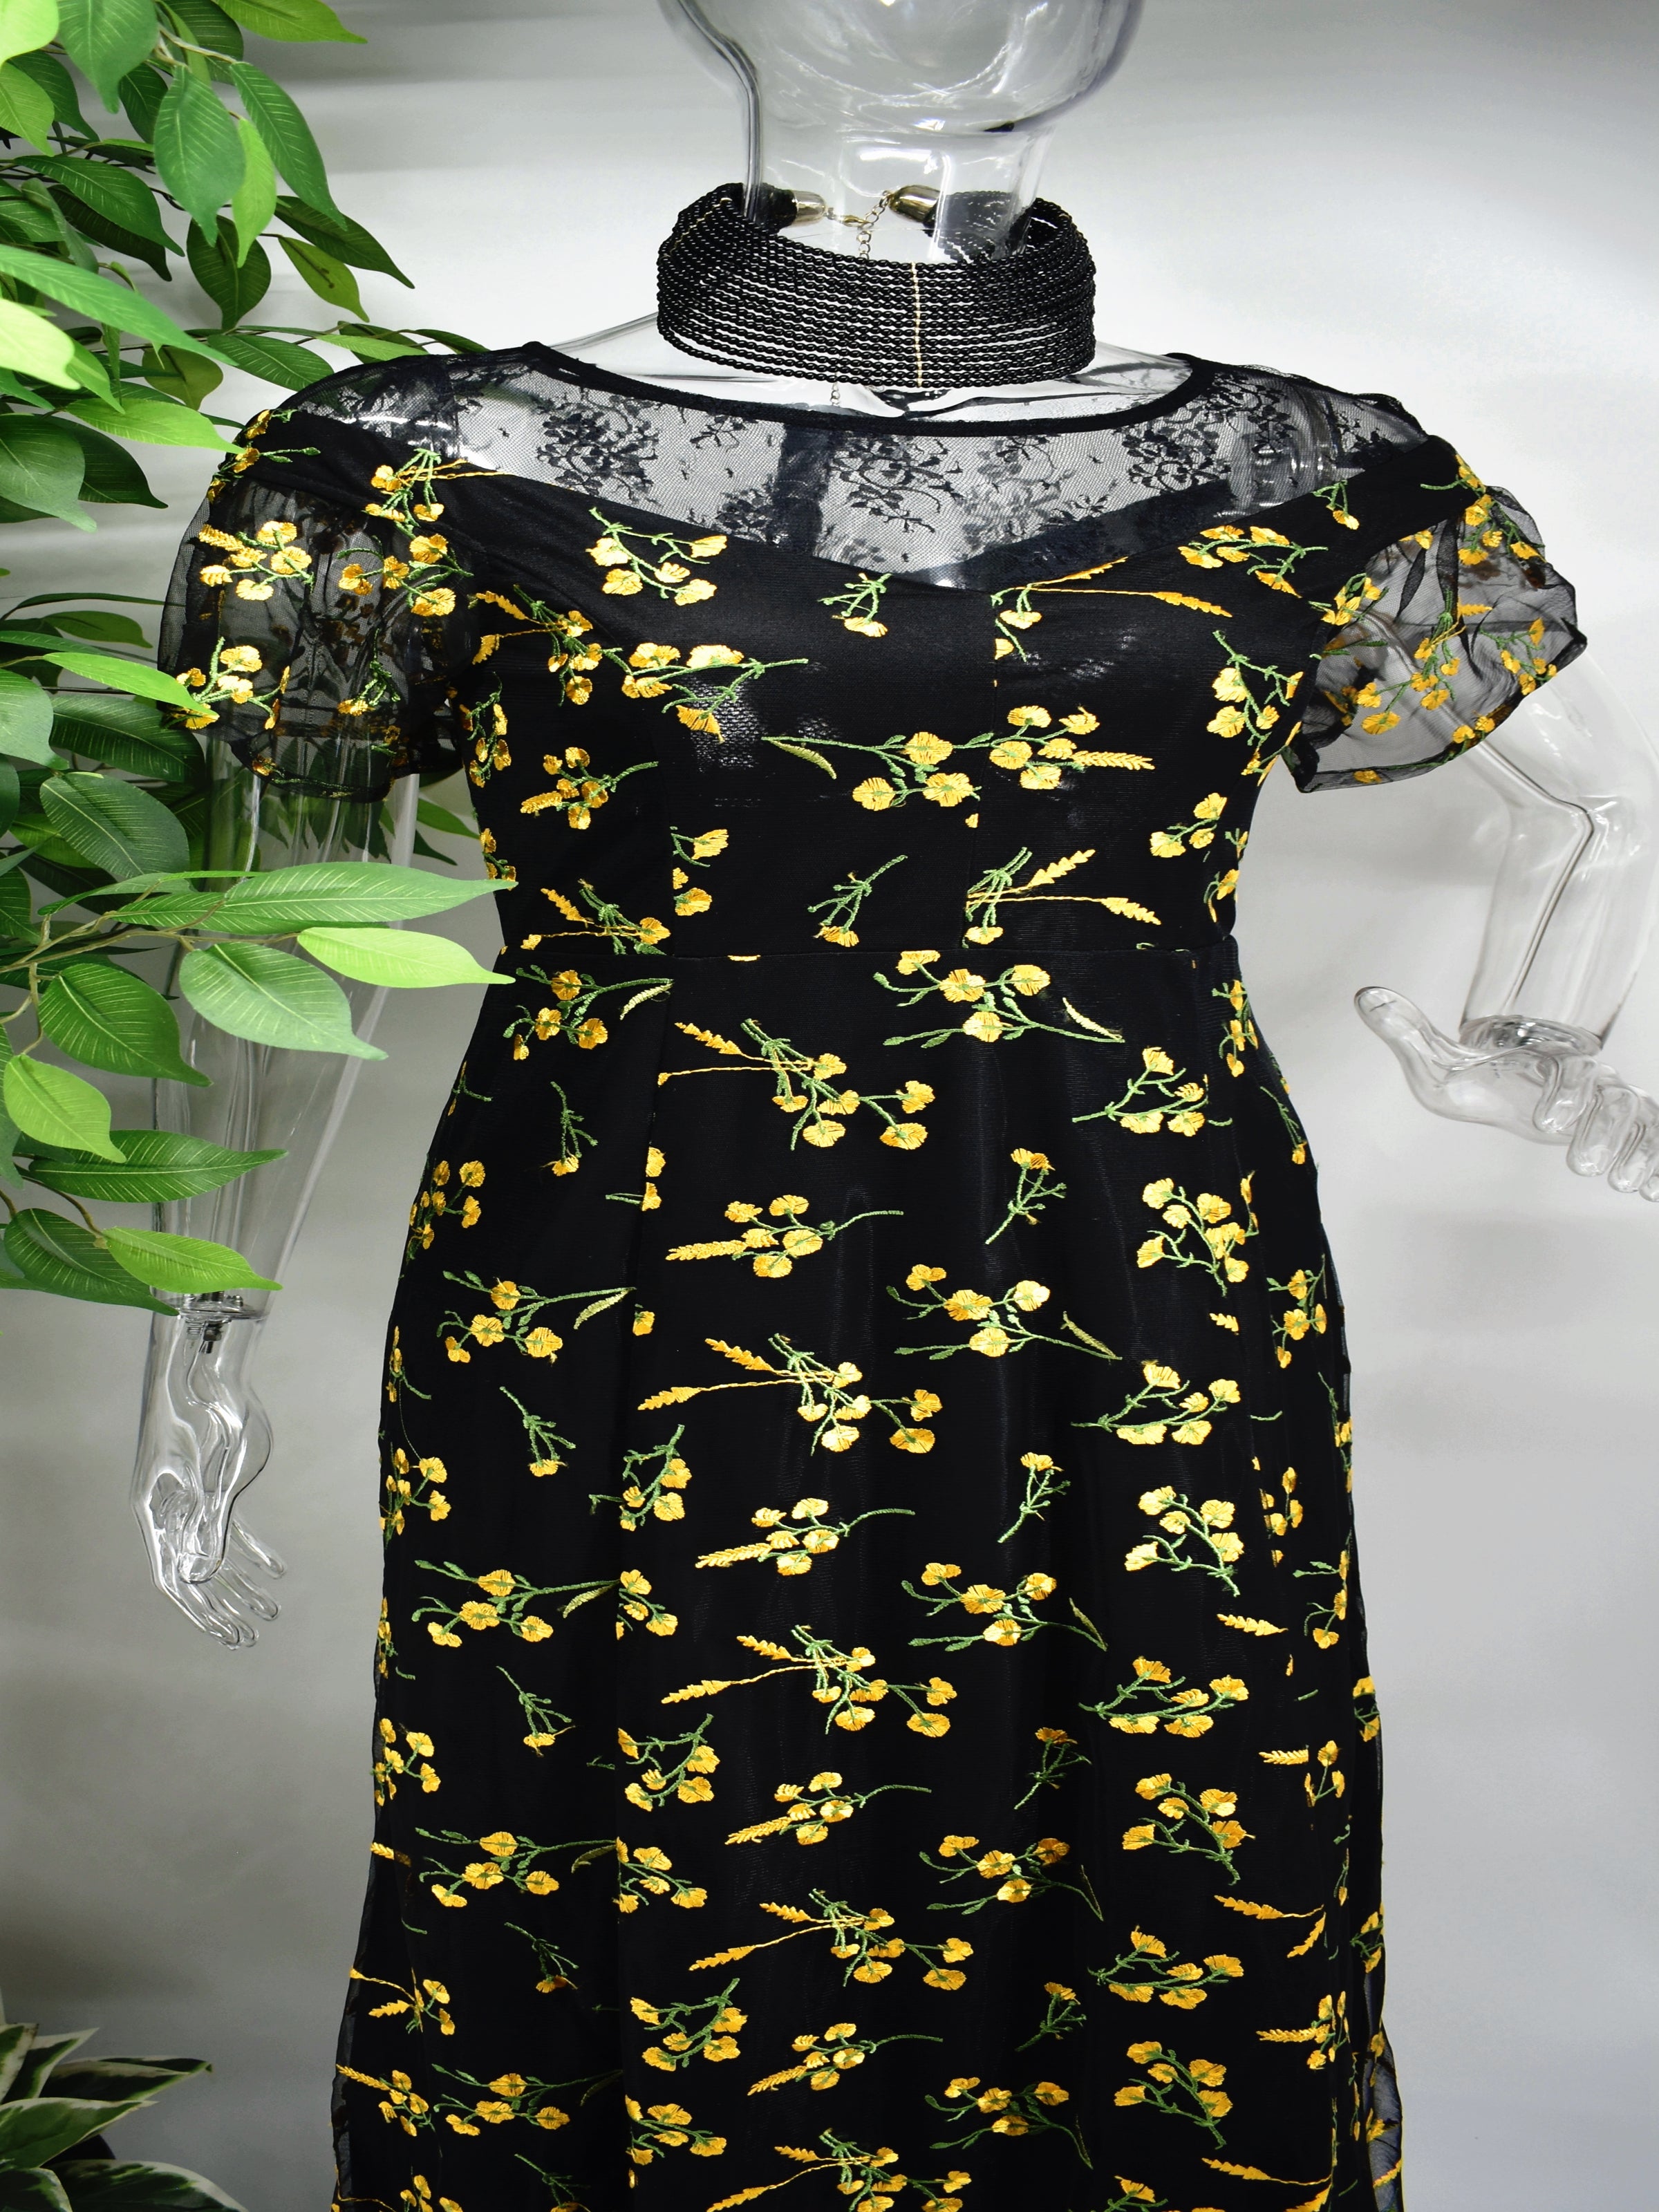 Our Beryle maxi black floral dress is a modern take on a classic silhouette. 